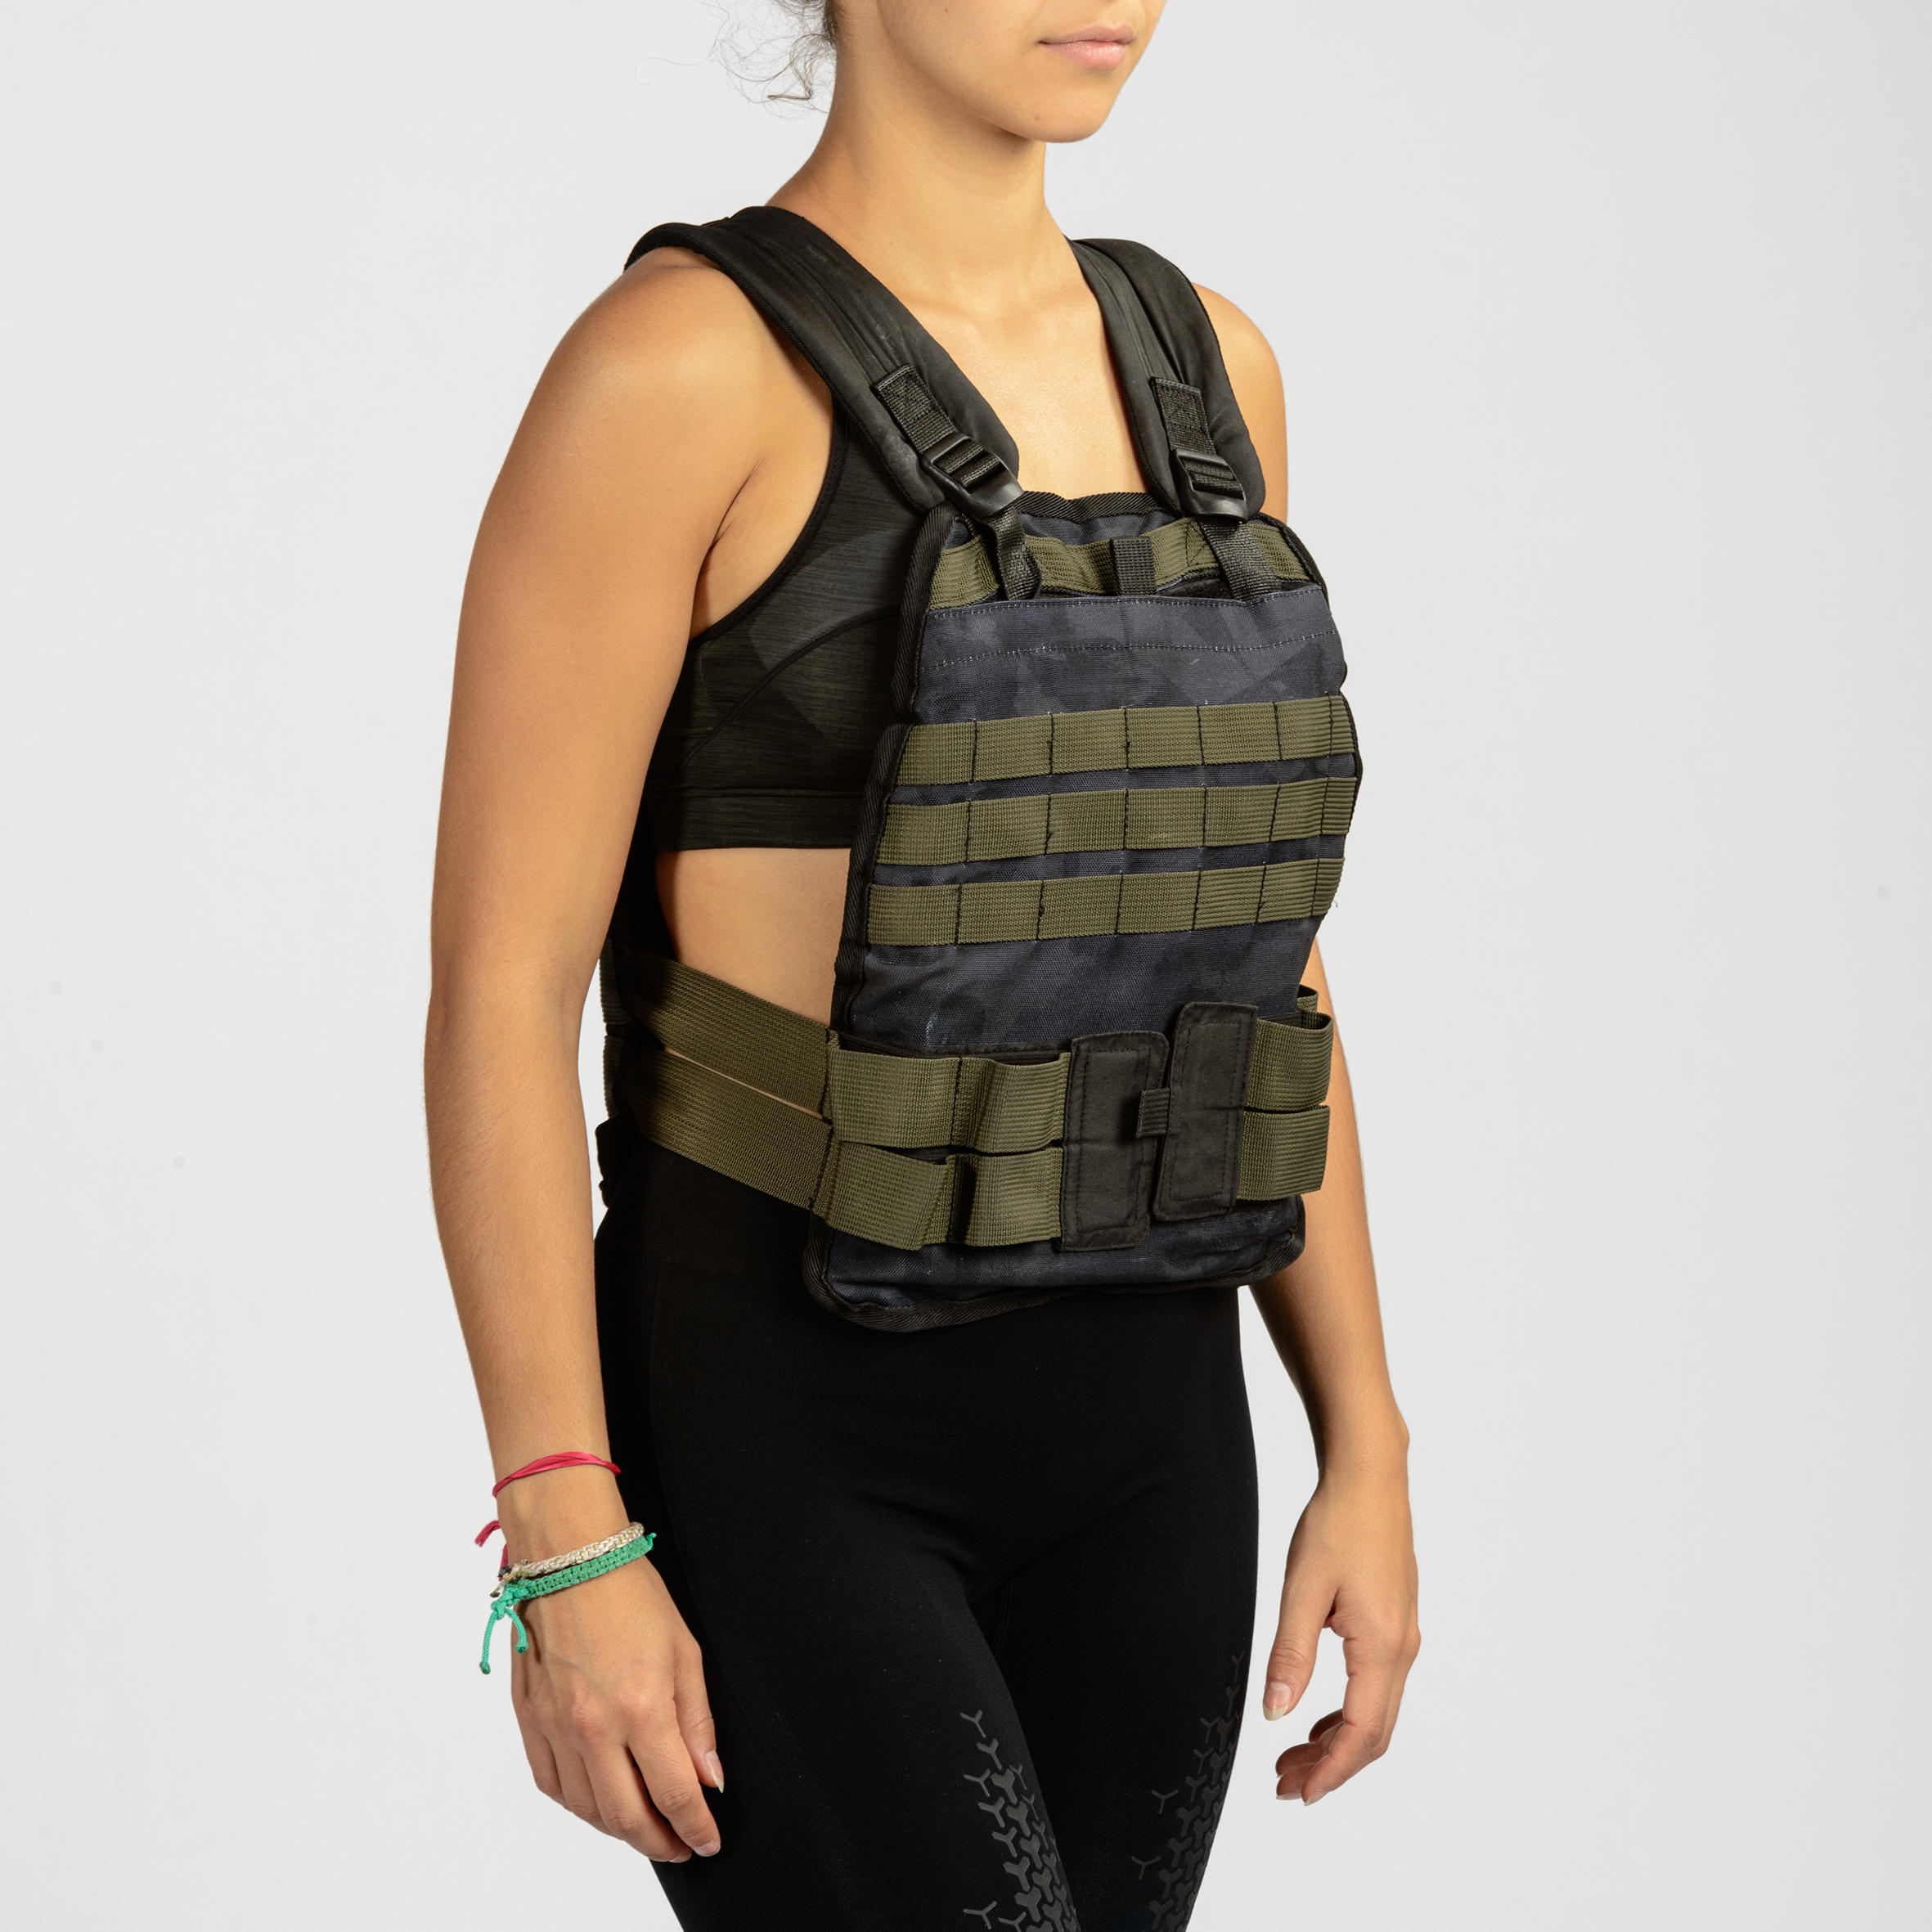 Strength and Cross Training Weighted Vest - 10 kg - CORENGTH